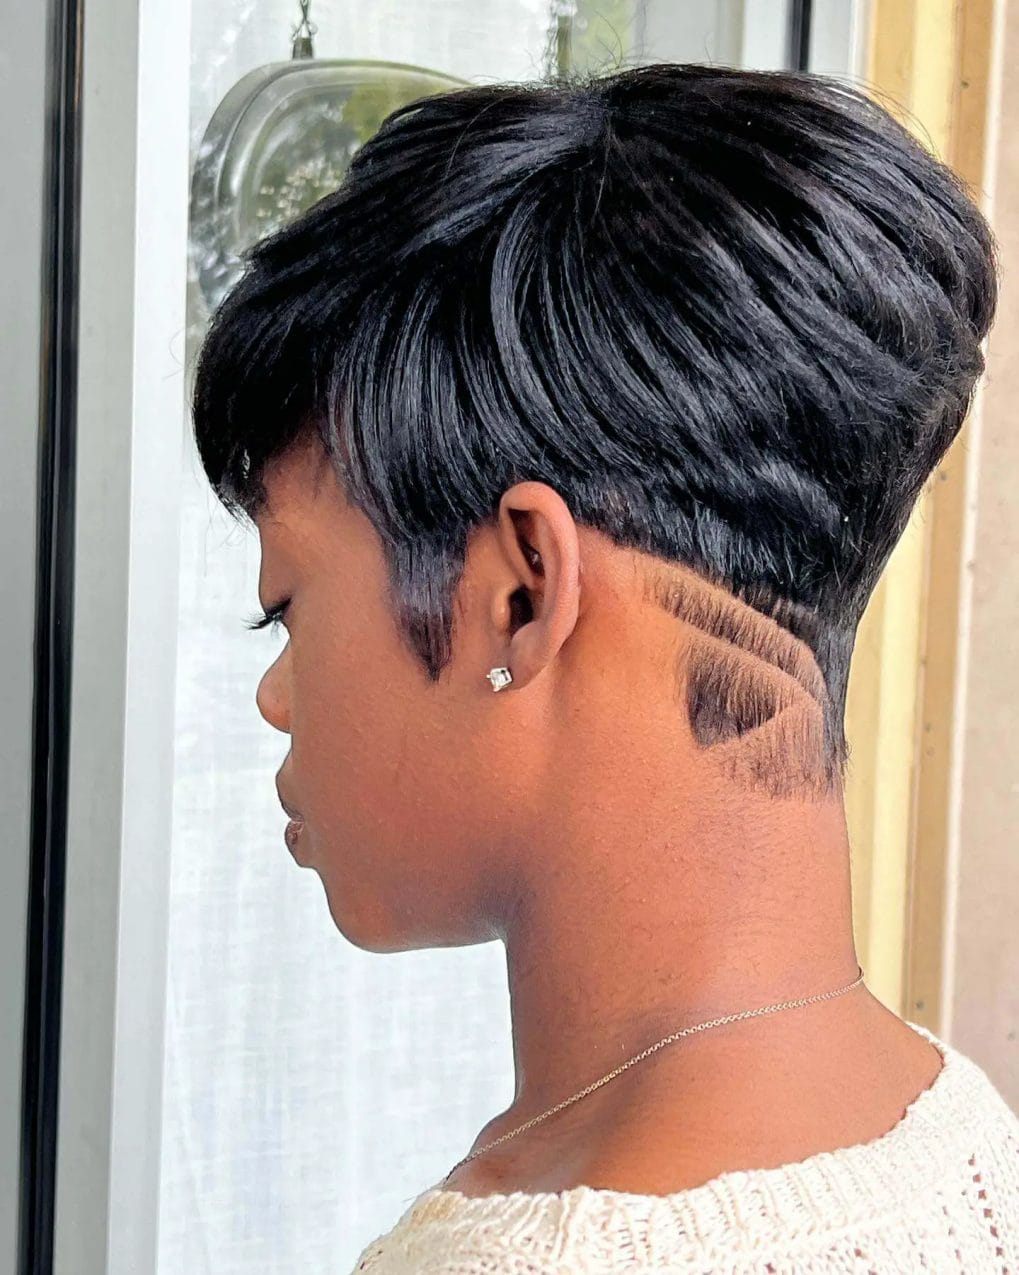 Sleek pixie cut with sculpted waves flowing into an etched wave undercut design.
